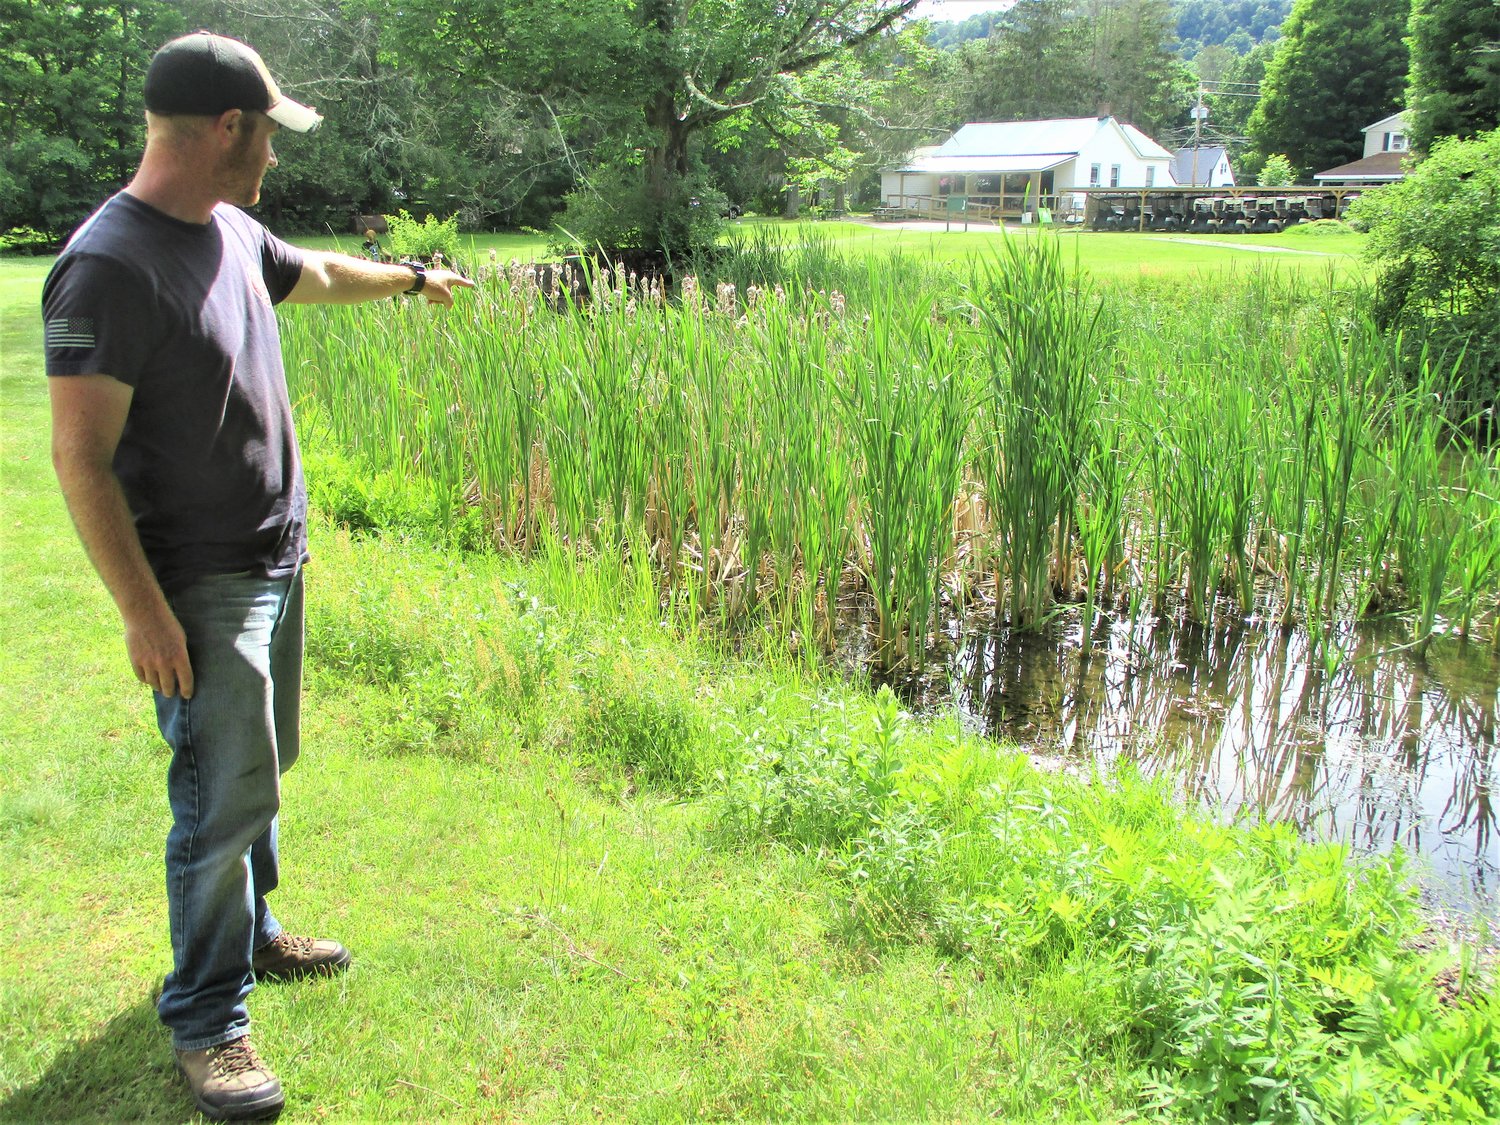 Twin Village Golf Course Superintendent, Gregory Feeney Jr., points to the cattail growth in the large pond separating the first and ninth  fairways. The pond will be cleaned out and reshaped this fall so that ice skating can take place  as part of the Winter Park activities.